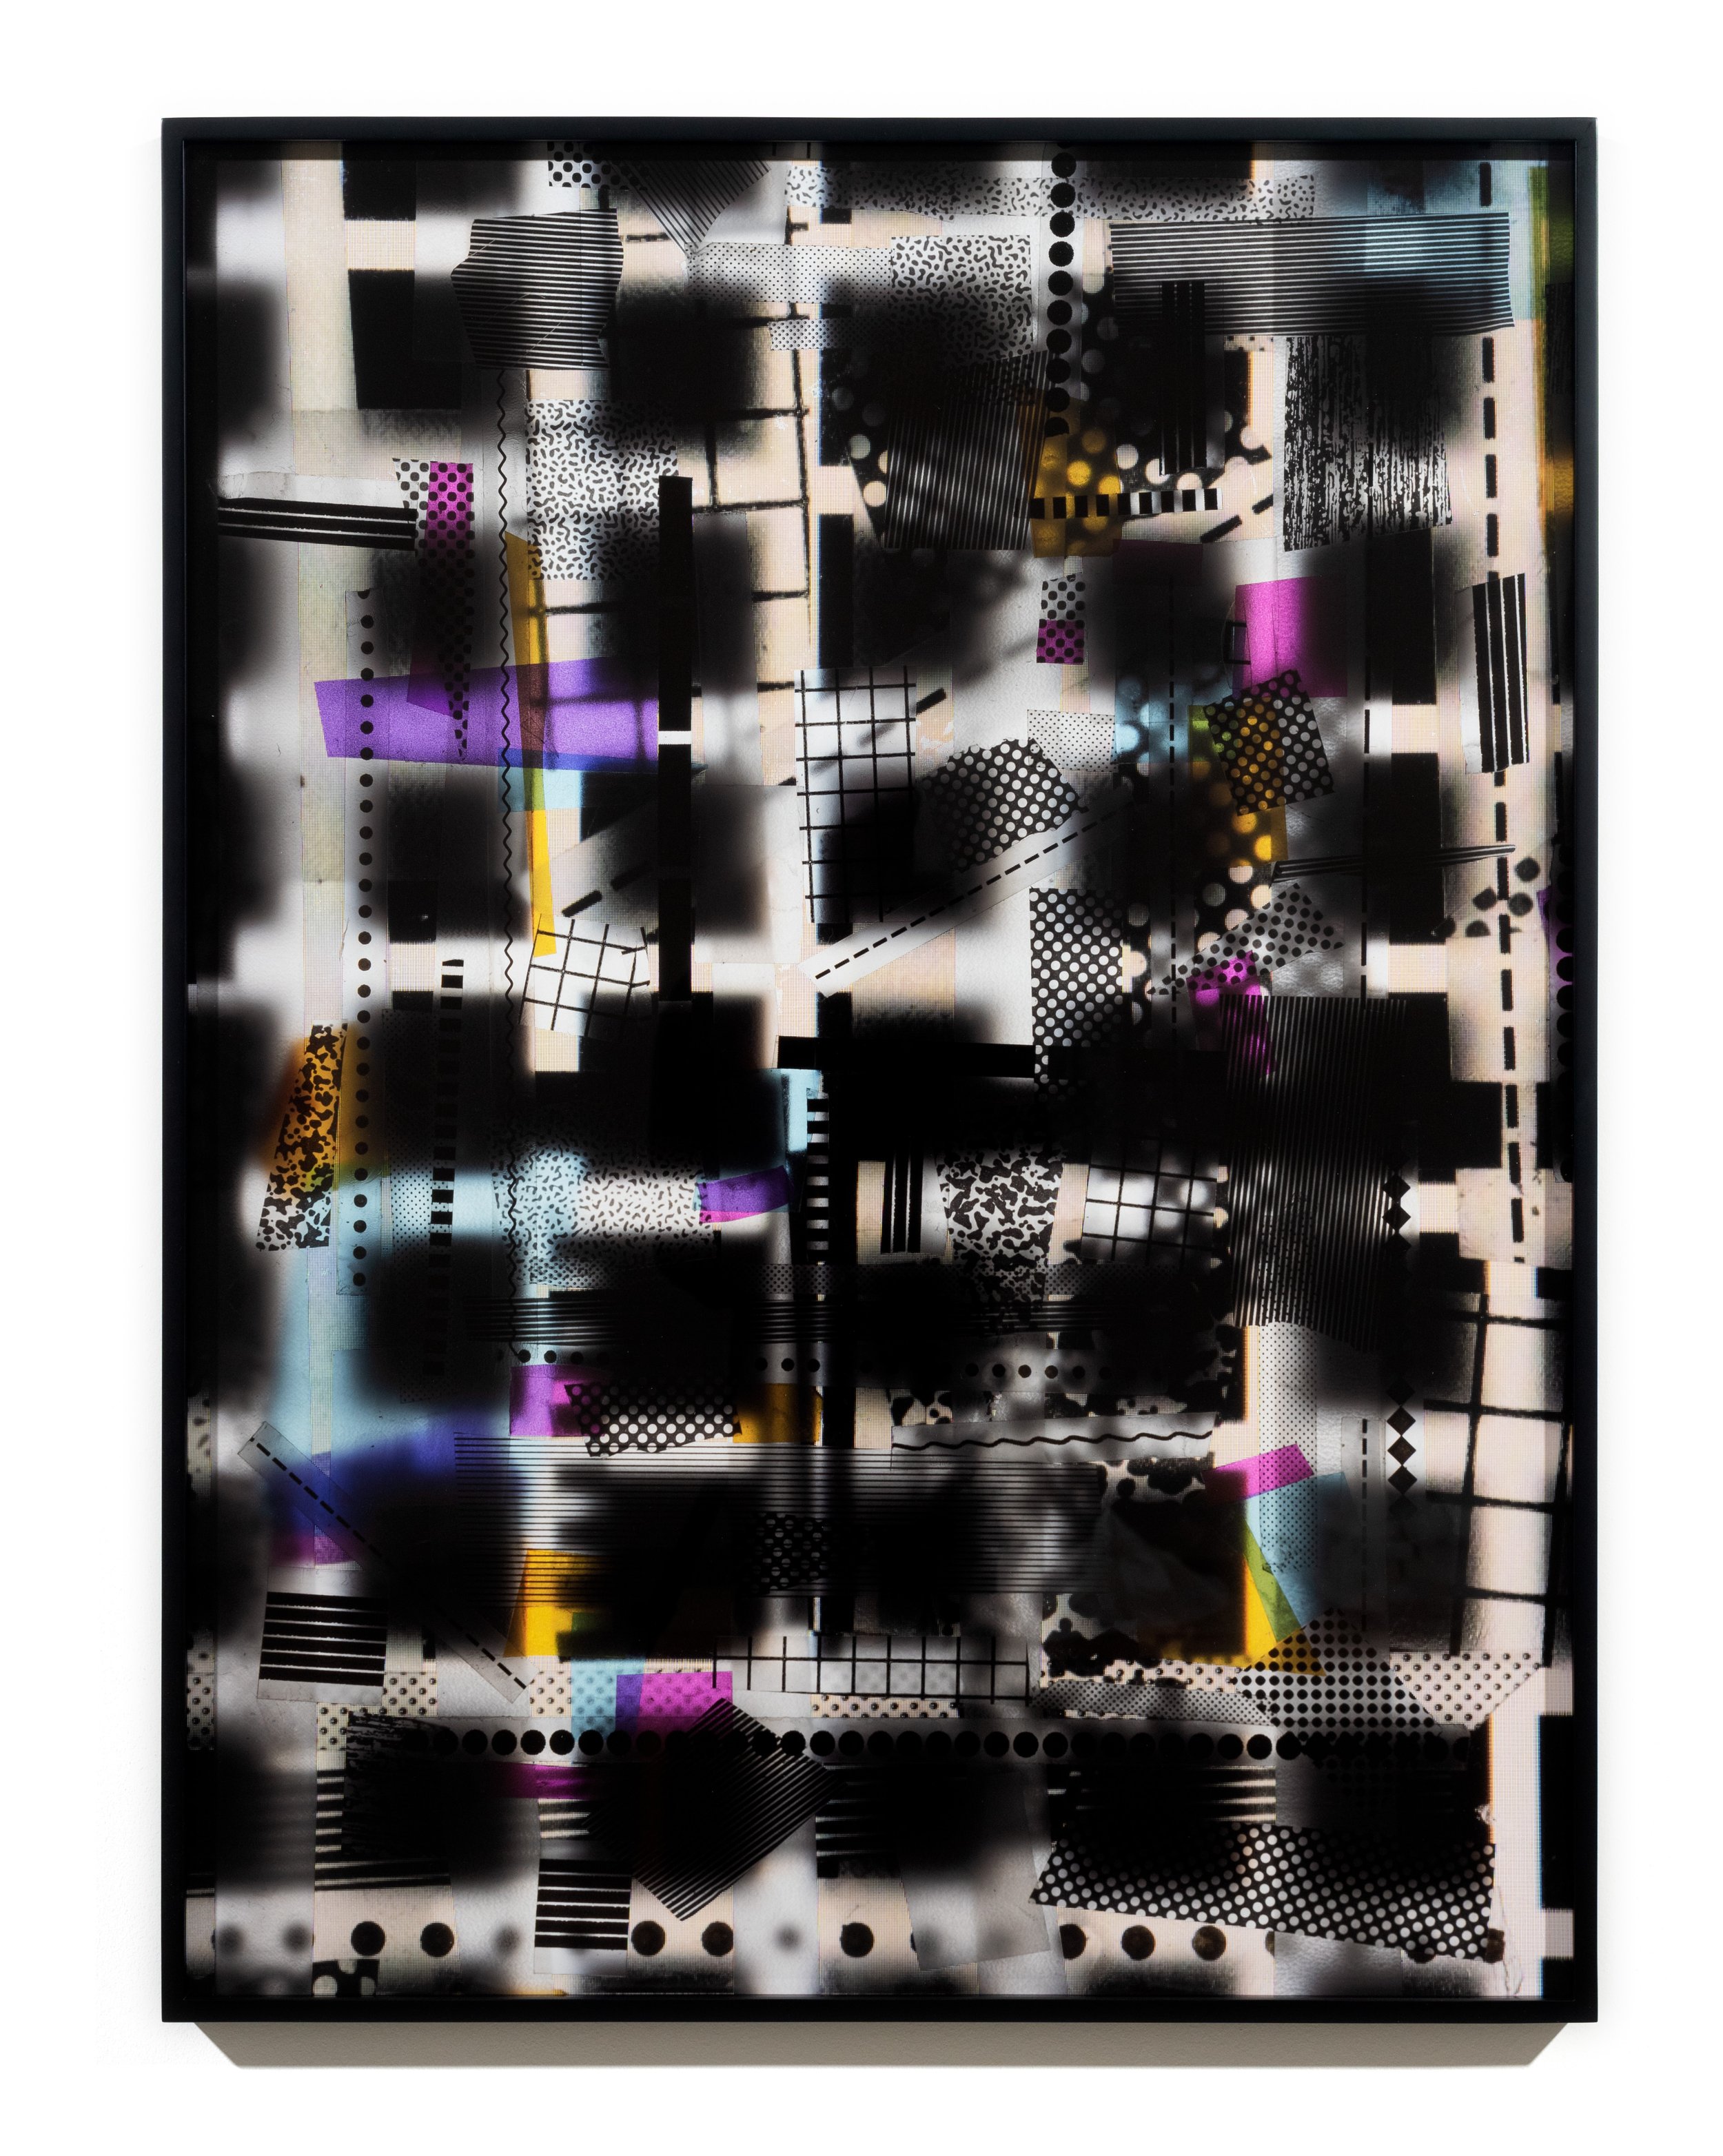   Broken Grid , 2021 Archival pigment print 40 x 30 x 1 1/2 inches (framed) 